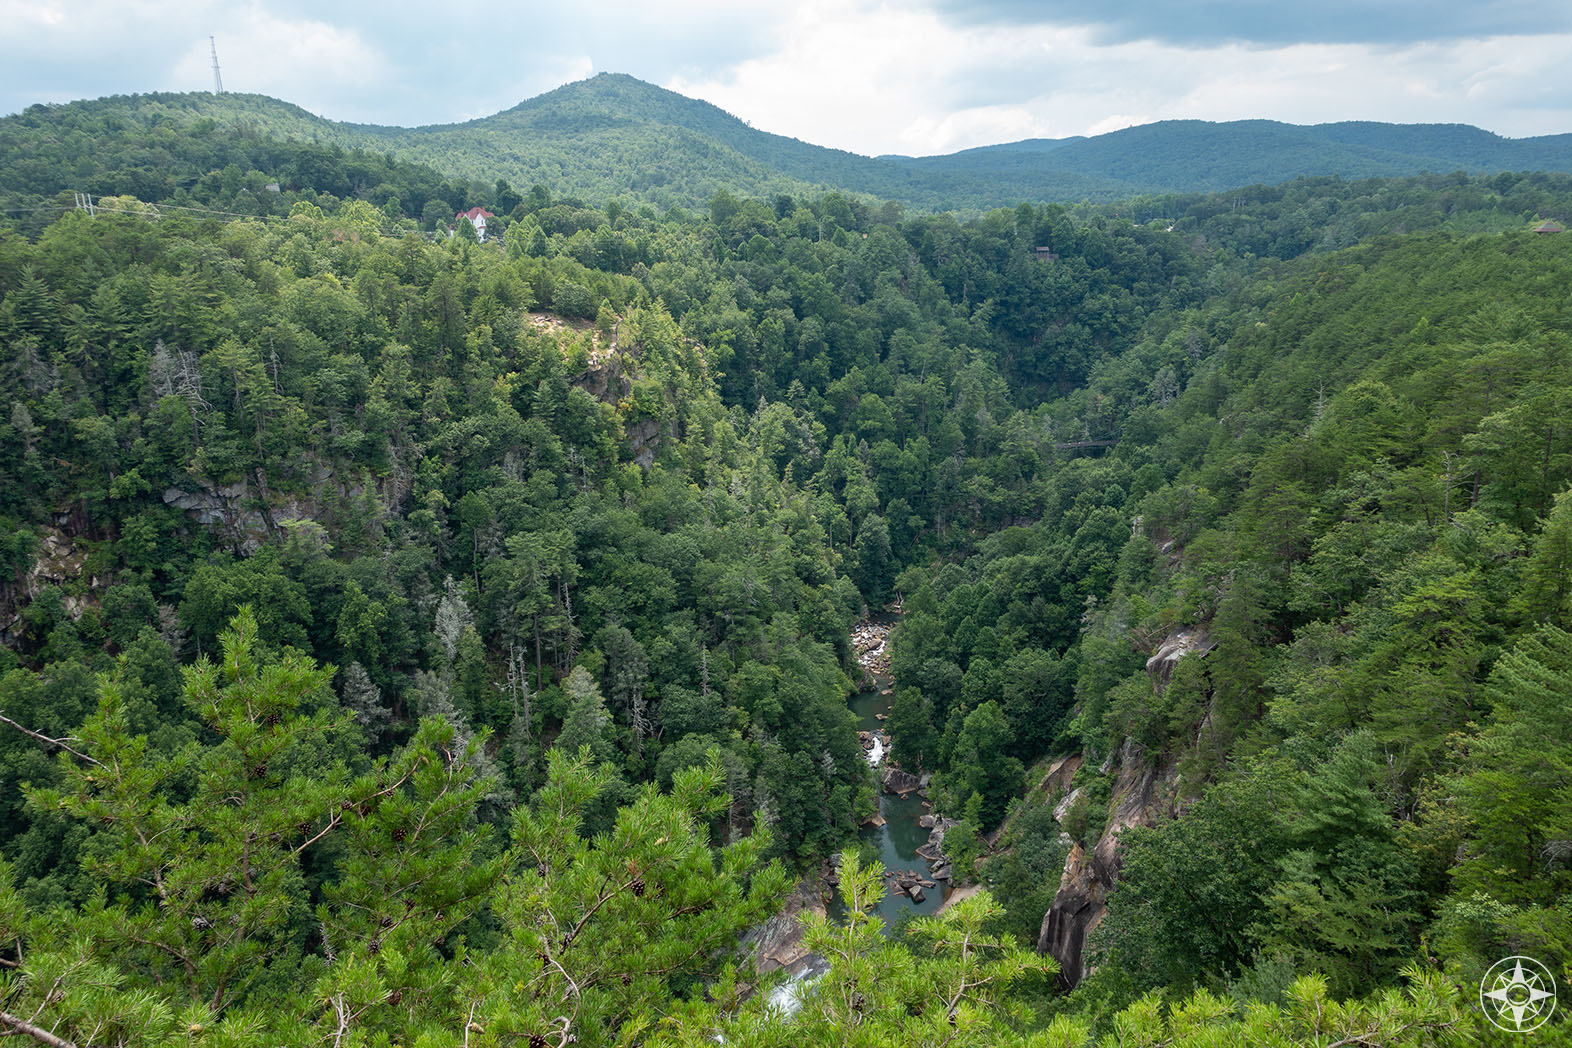 Upstream view of the Tallulah Gorge with the South Rim on the left, the North Rim on the right and the suspension footbridge in the middle 